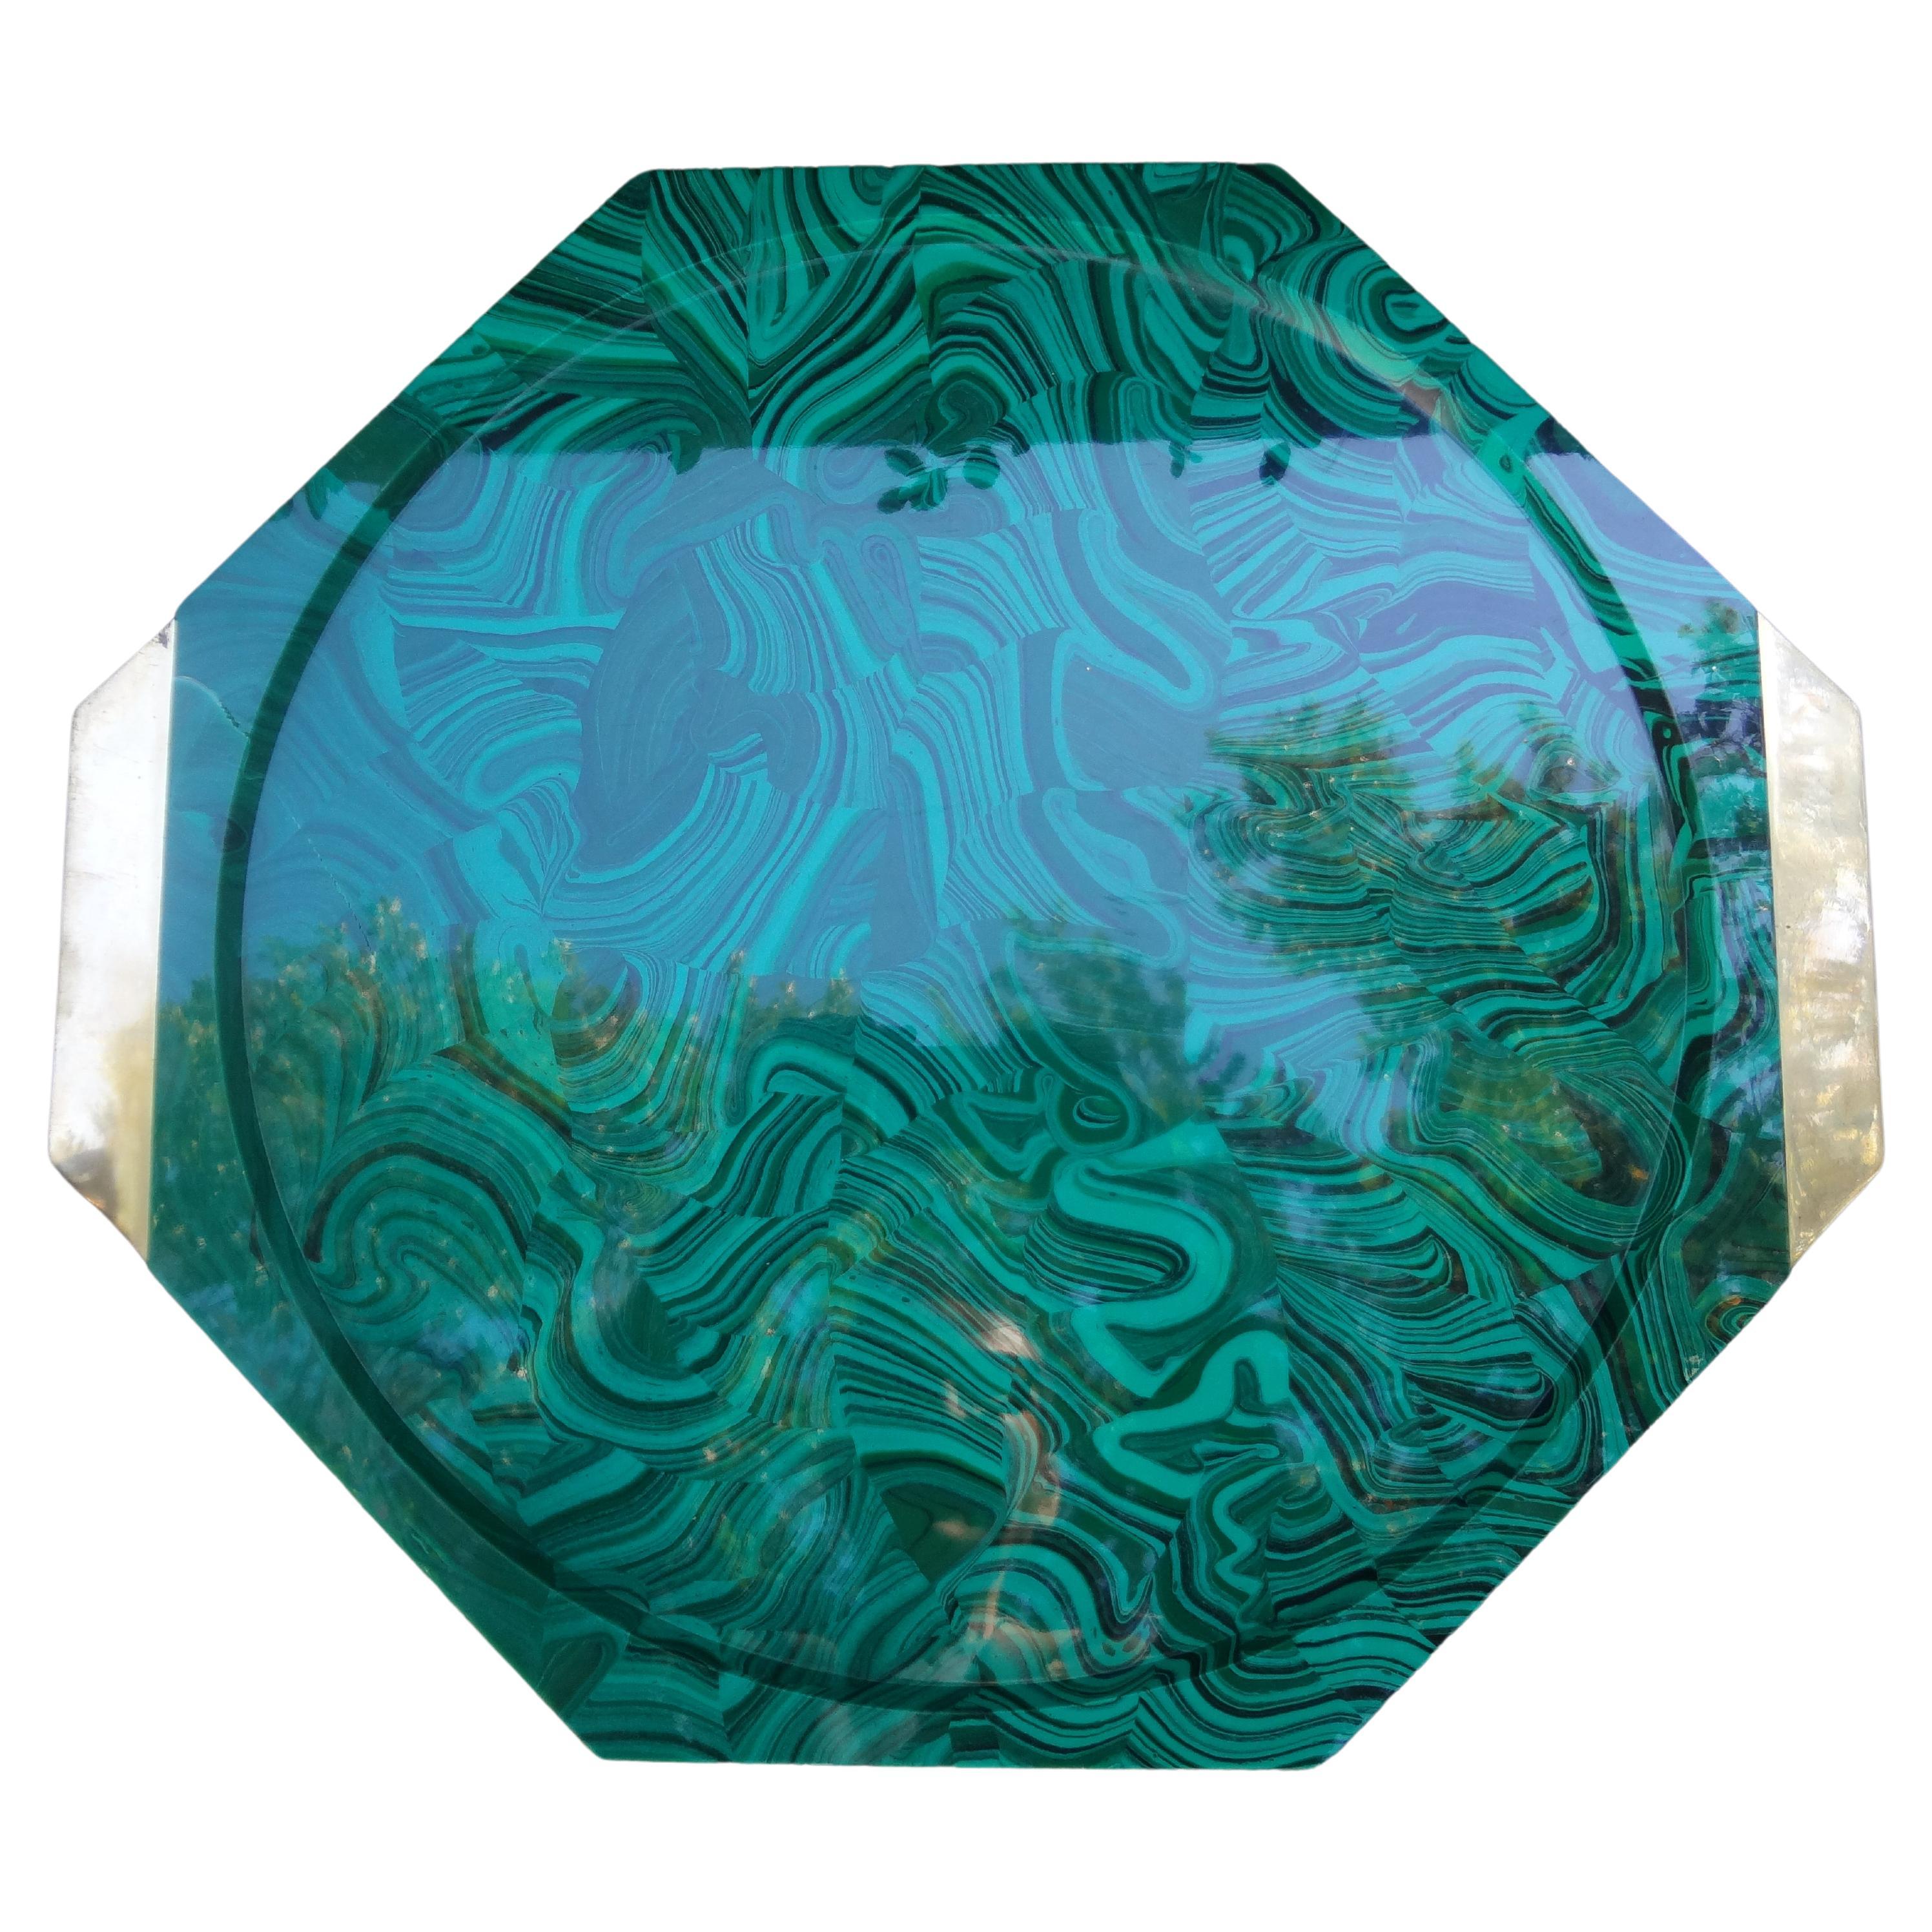 Vintage Italian faux malachite tray. This stunning Hollywood Regency octagonal tray has a beautiful faux malachite finish and brass handles. The perfect serving tray, coffee table tray, powder room tray or vanity tray.
Stunning!